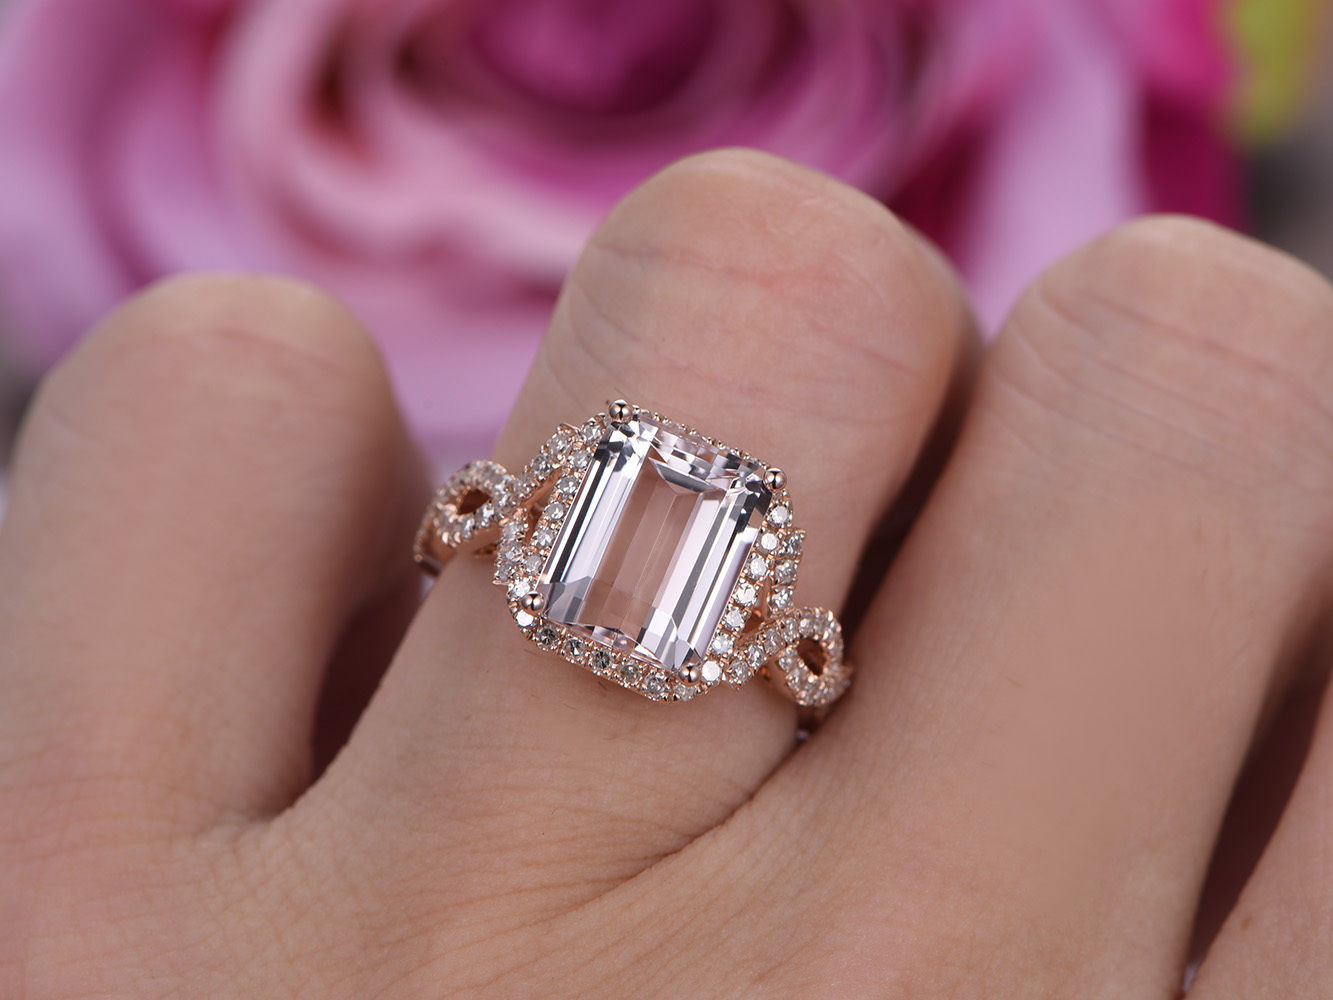 Reserved for Ashley: 7x9mm Emerald Cut Morganite Infinite Love Ring with Diamond Halo Forever together ring guards